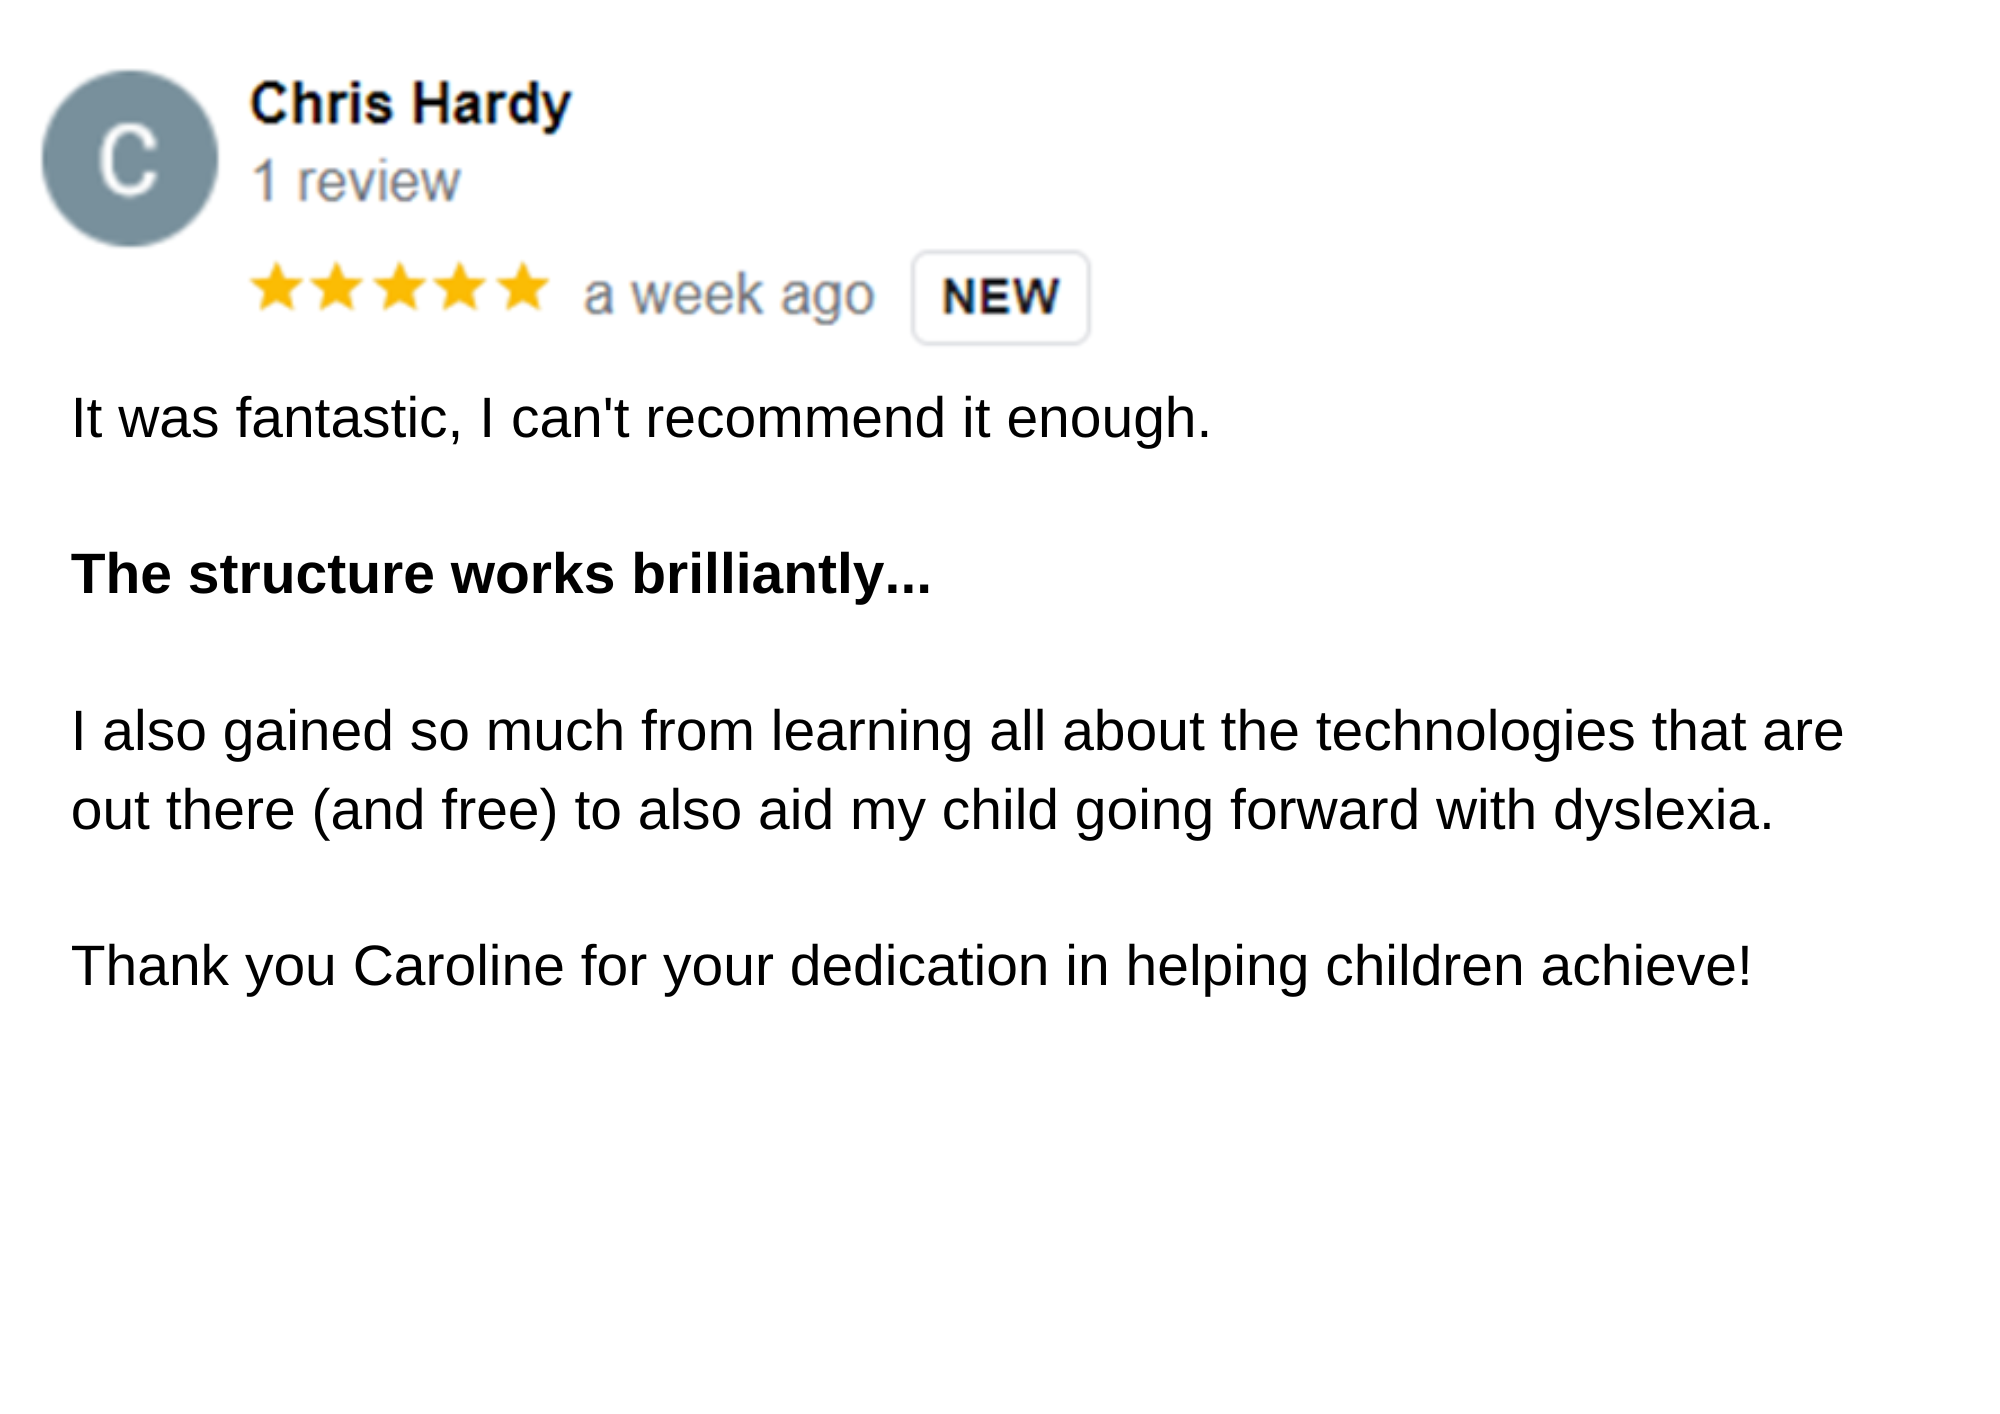 Chris Hardy Google Review.png